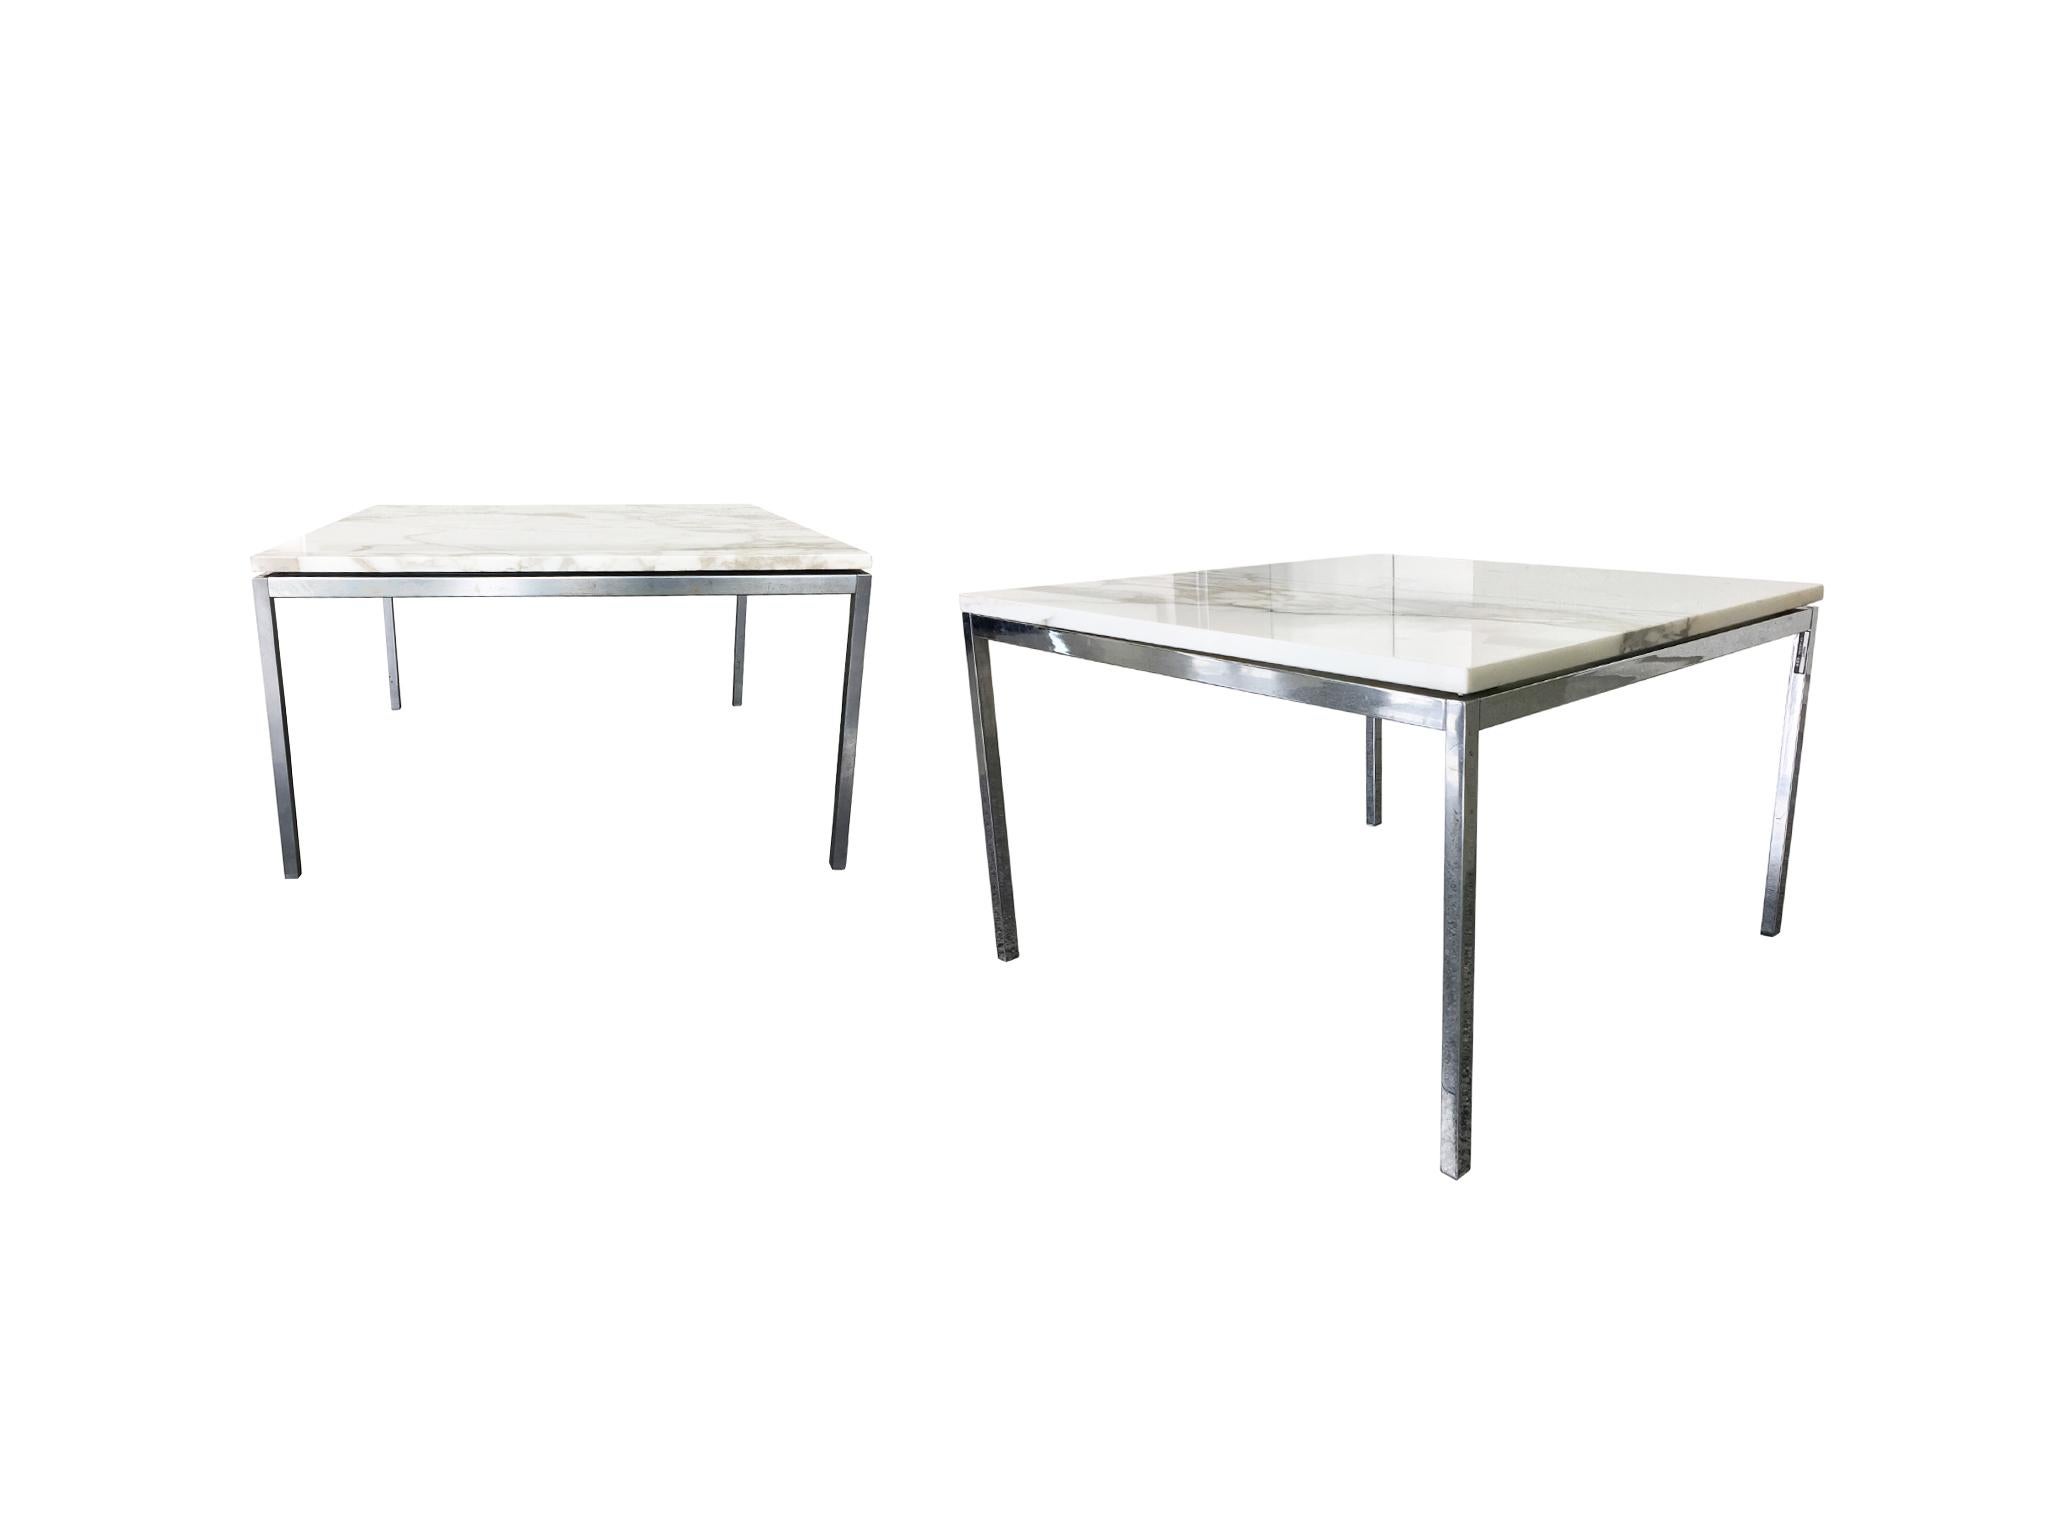 Elegant side tables attributed to Knoll. Manufactured in the 20th century. There are two available. One table measures 30 inch square. The other table measures 27 in square. Each is is comprised of a white marble top and chrome base & legs. The